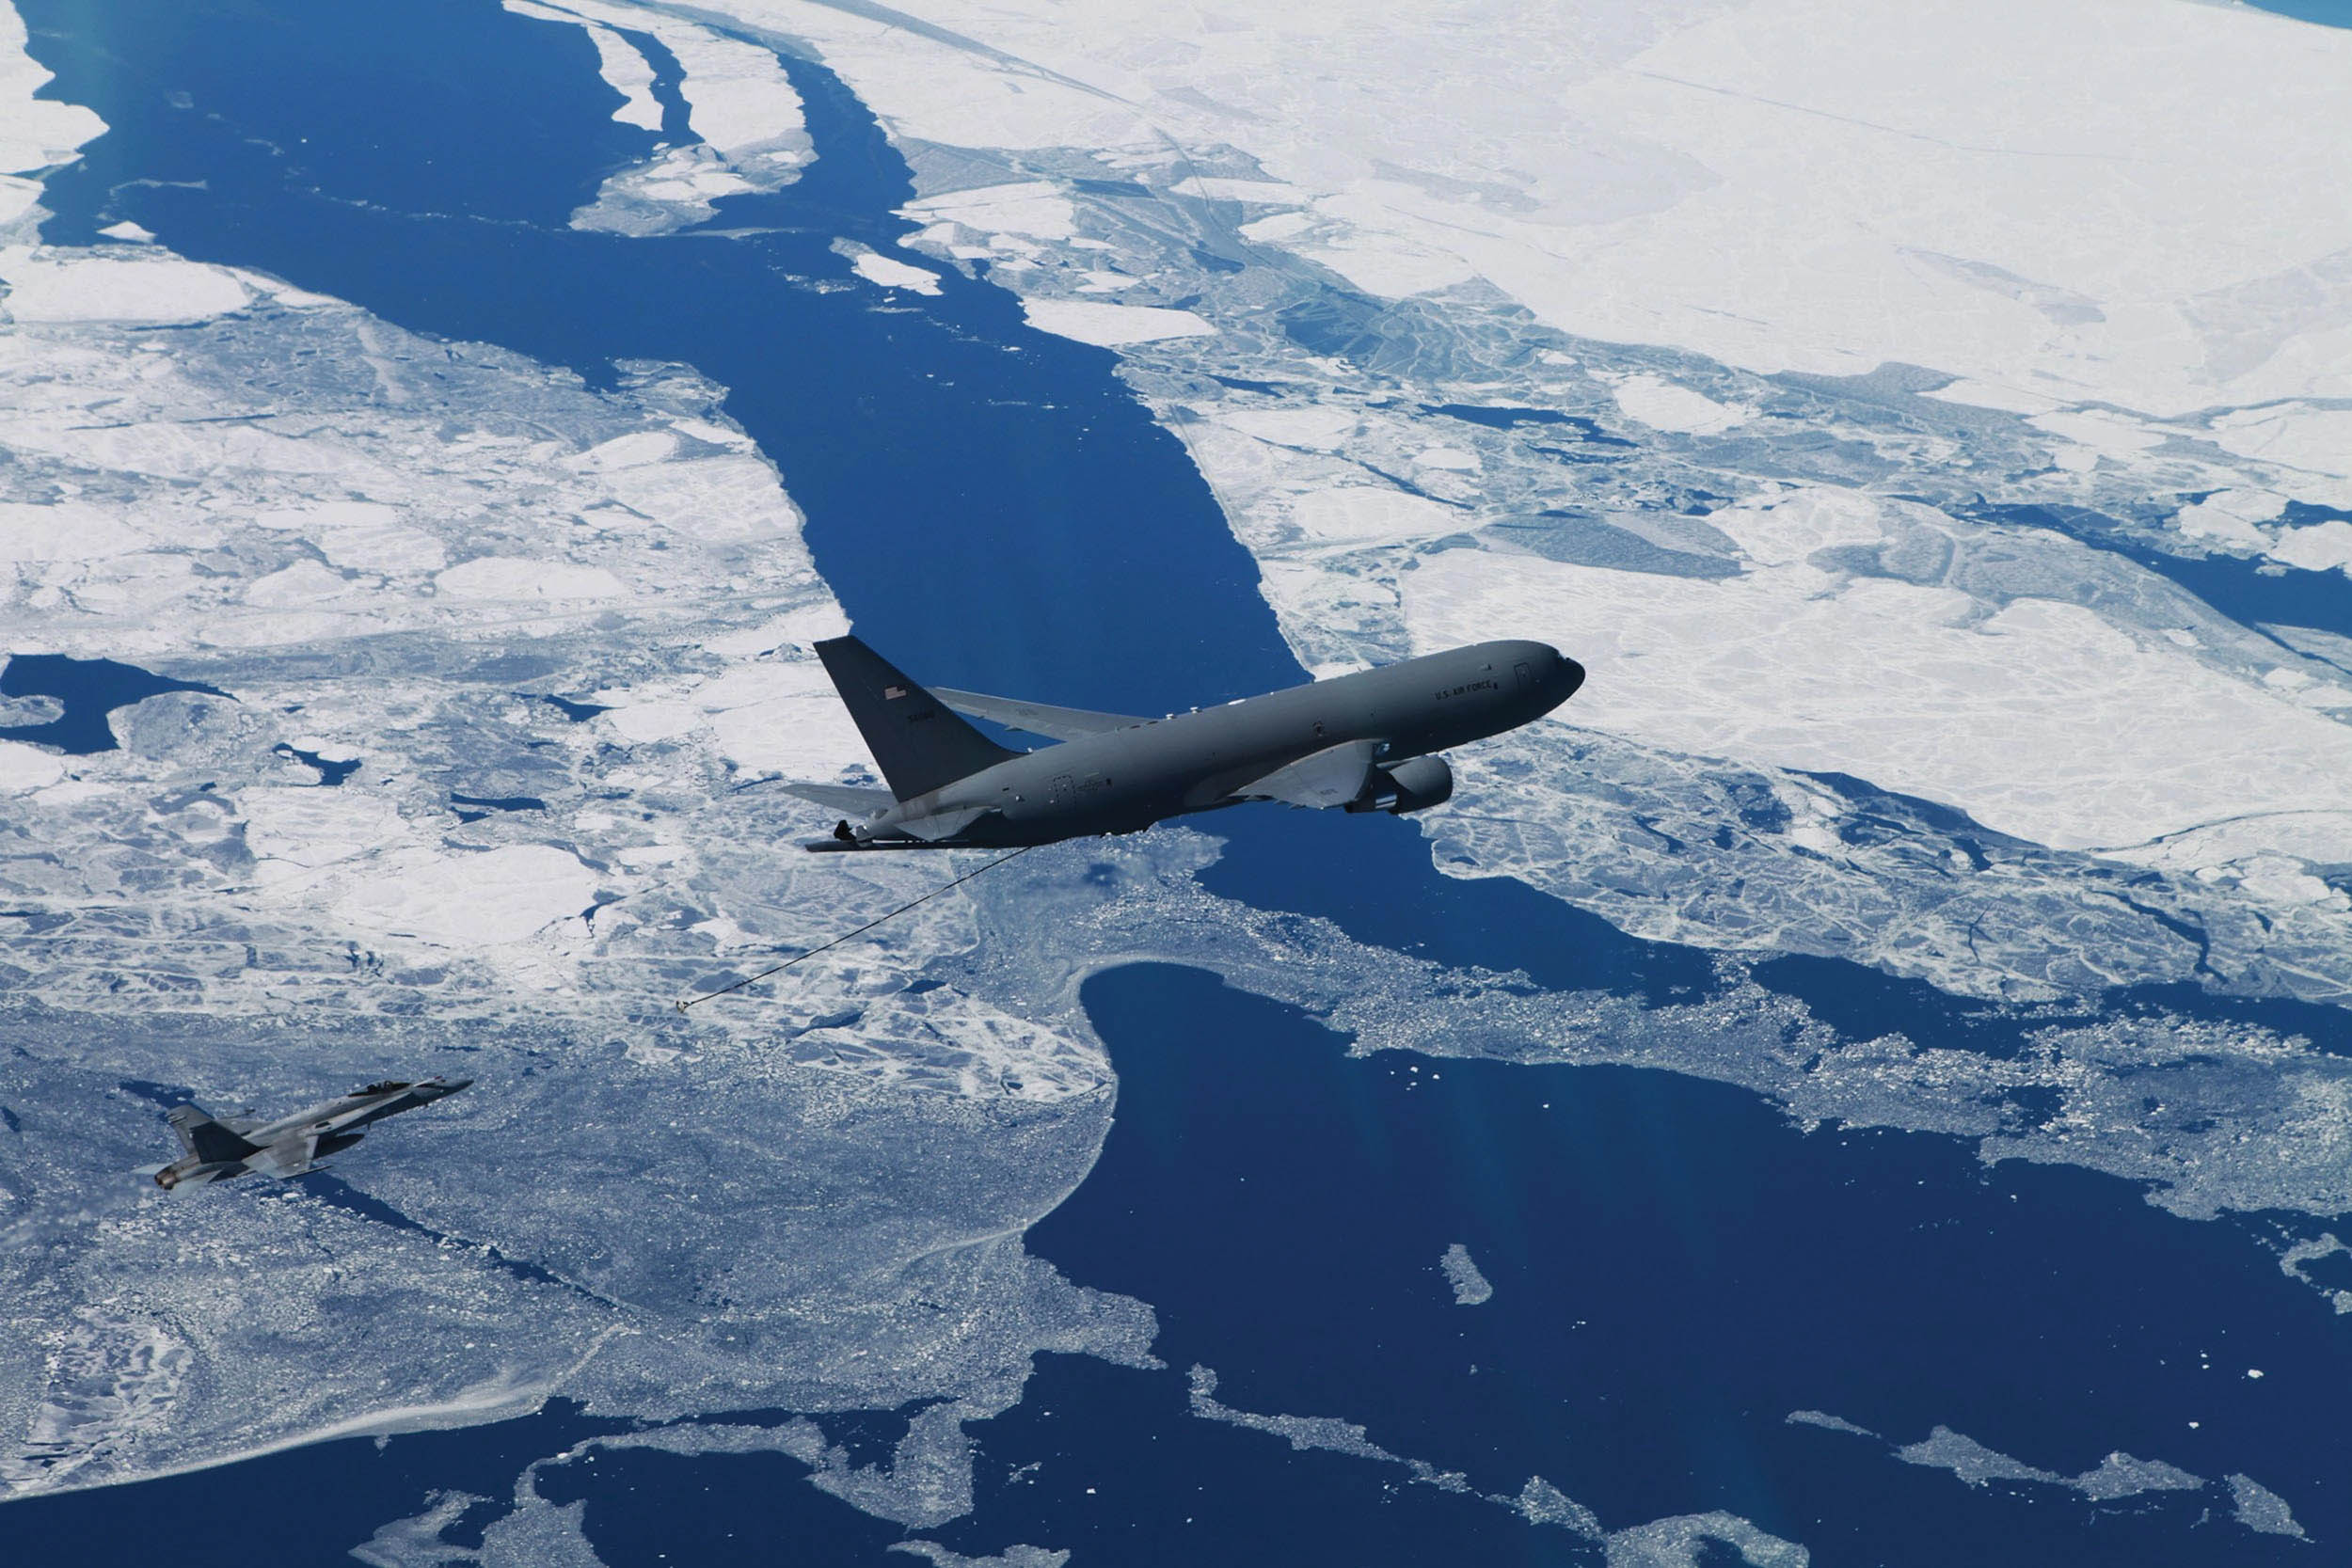 KC-46A Pegasus tanker aircraft from Air Force Reserve Command’s 931st Air Refueling Wing refuels Finnish F/A-18, demonstrating U.S. European Command’s commitment to bolstering security on NATO’s eastern flank in Poland, April 13, 2023 (Courtesy Finland Air Force)